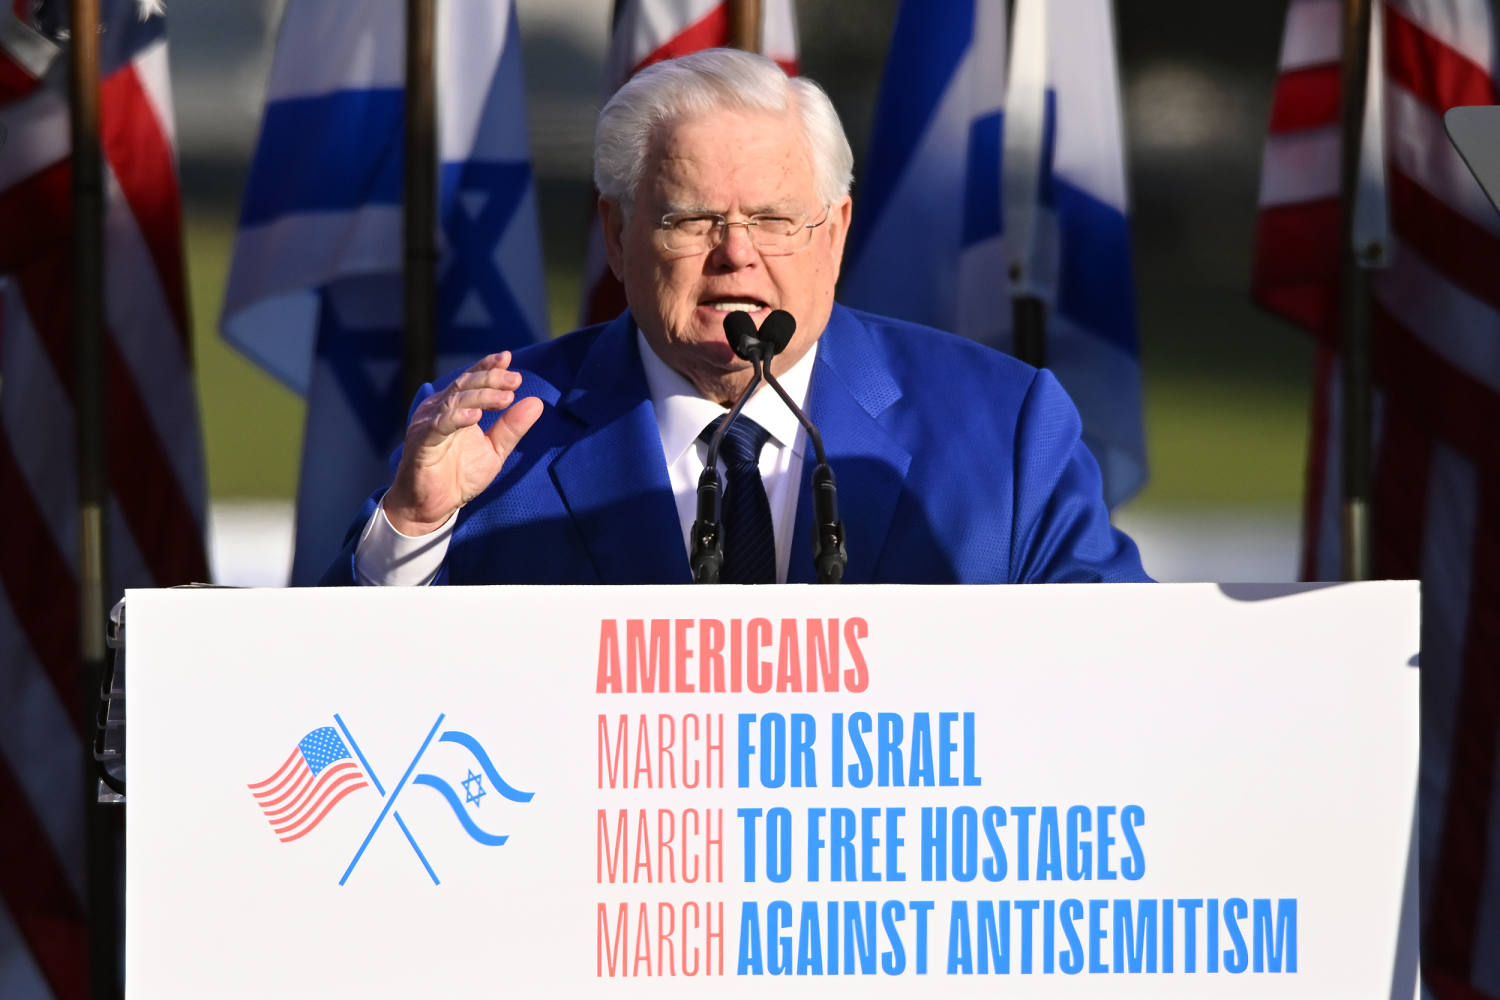 Divisive megachurch pastor draws criticism for role at March for Israel